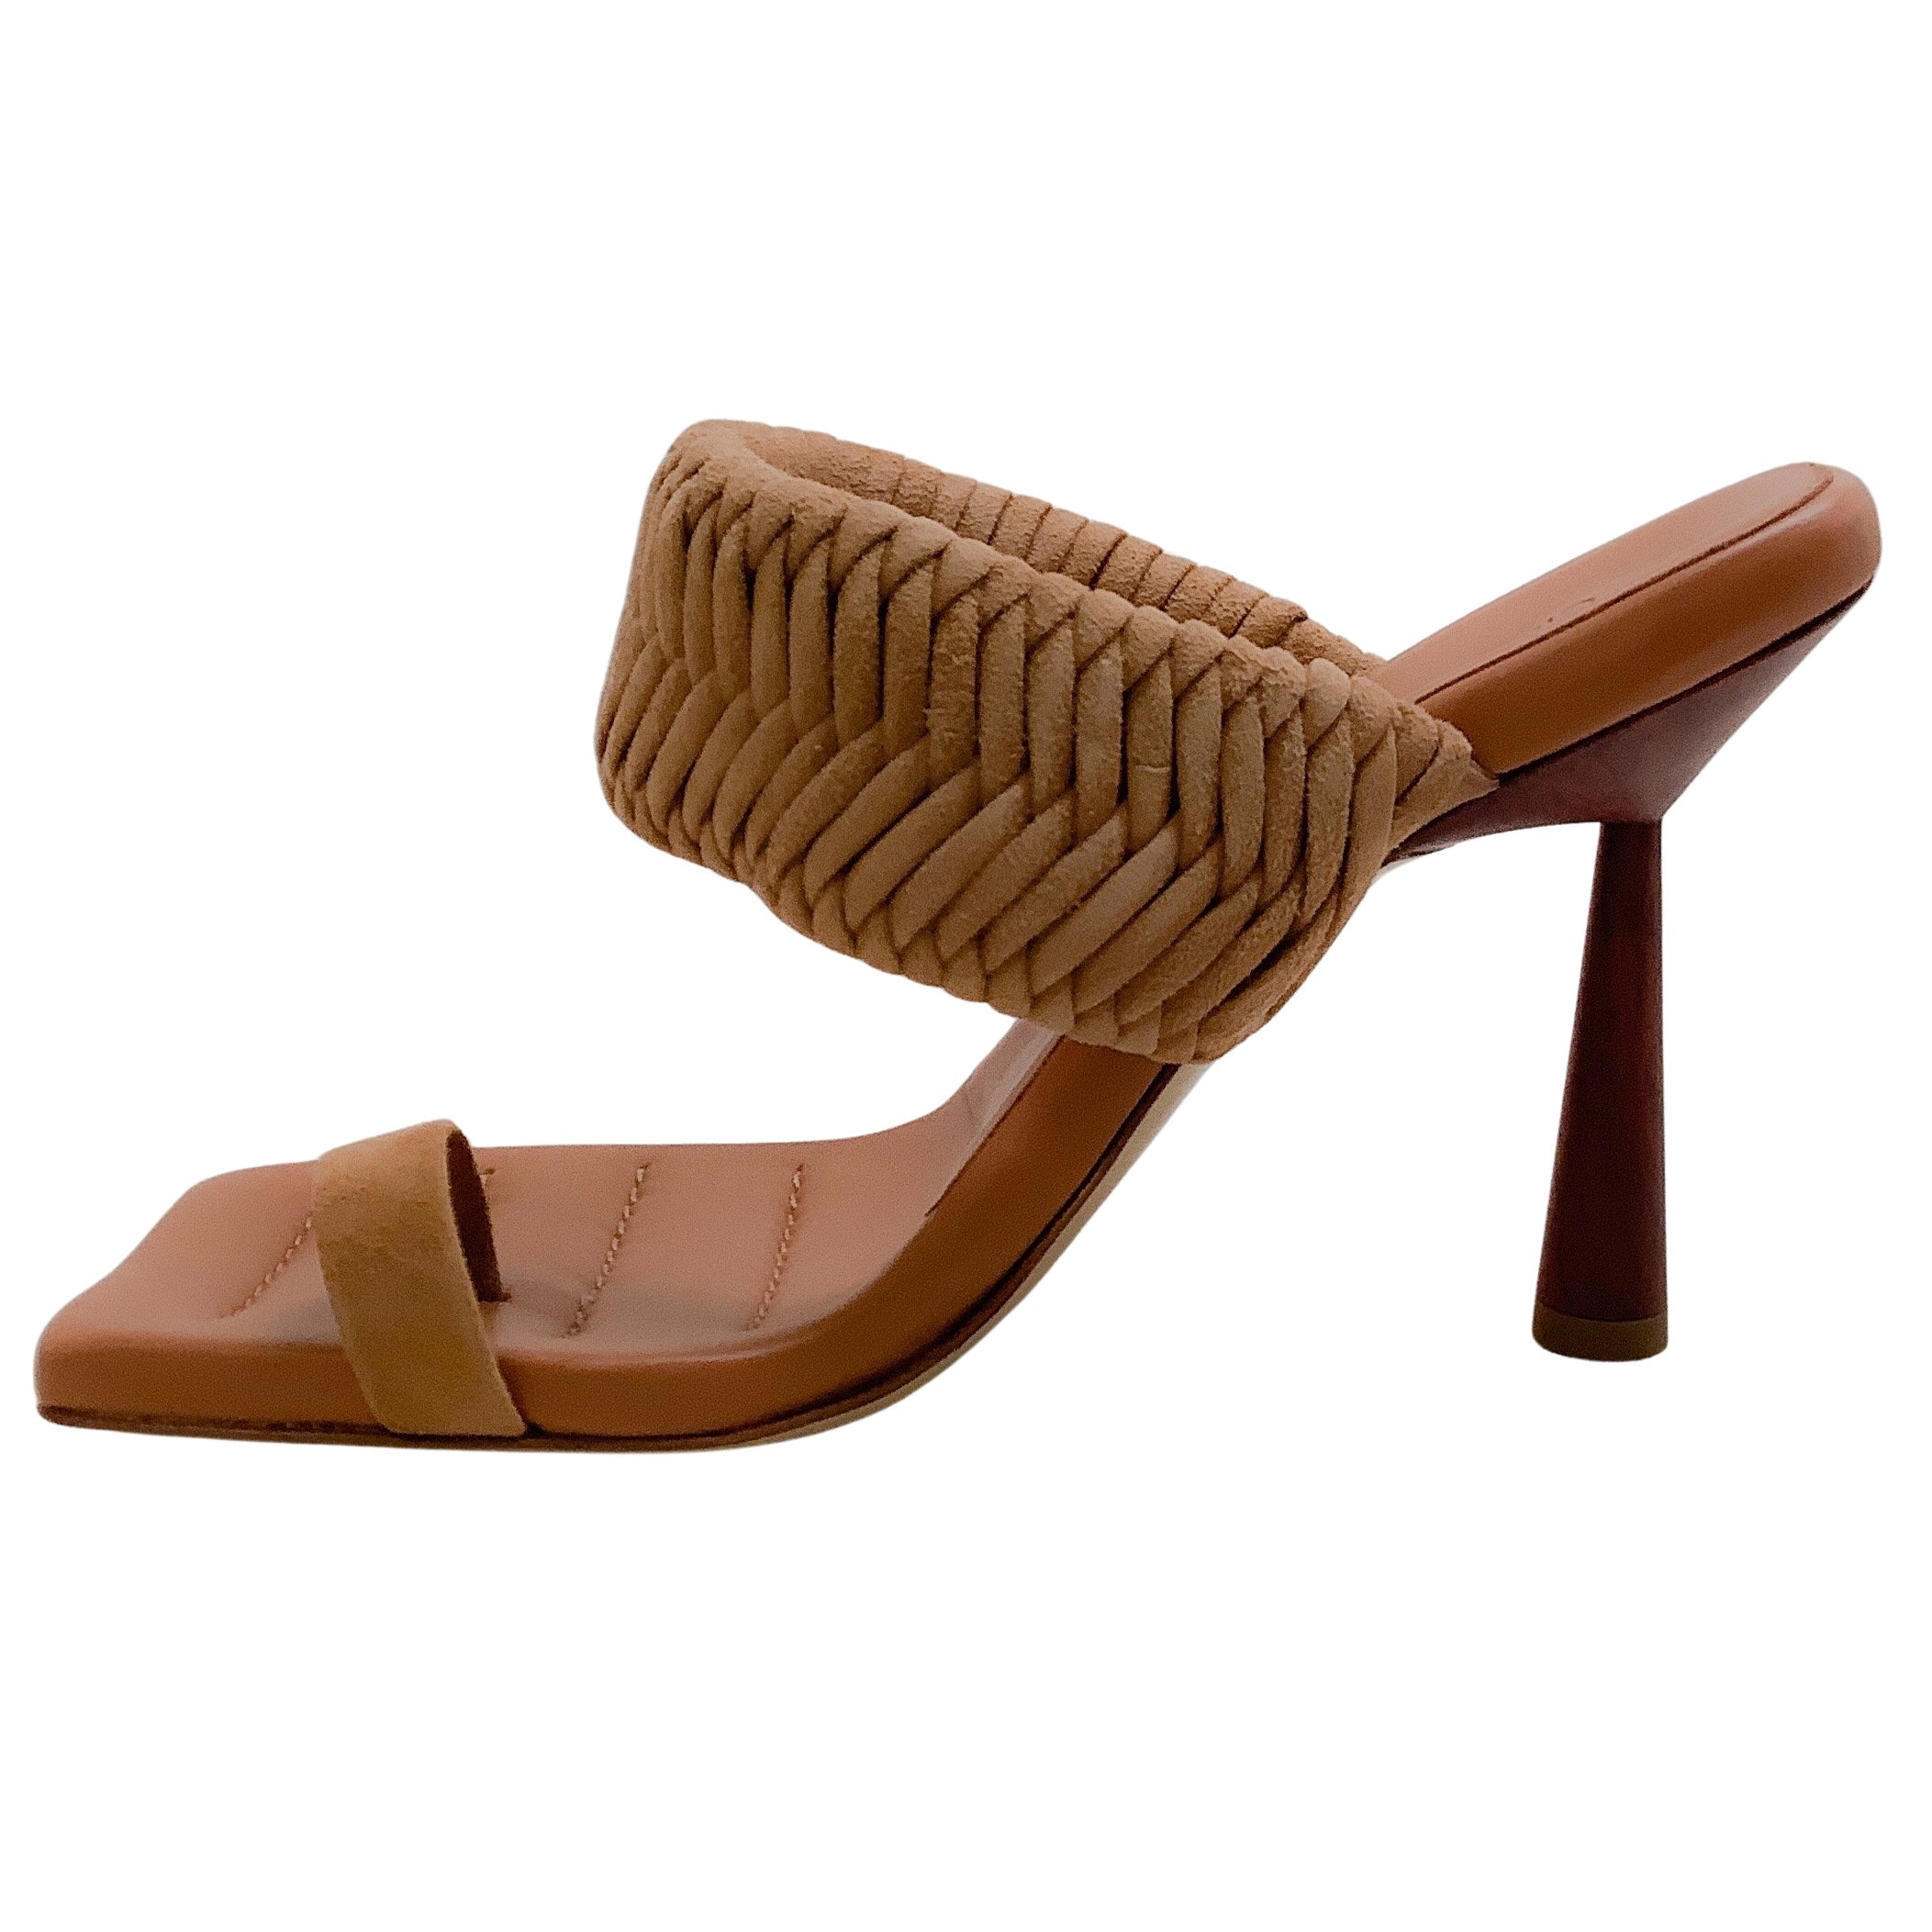 GIA / RHW Chocolate Suede Rosie Toe Ring Sandals